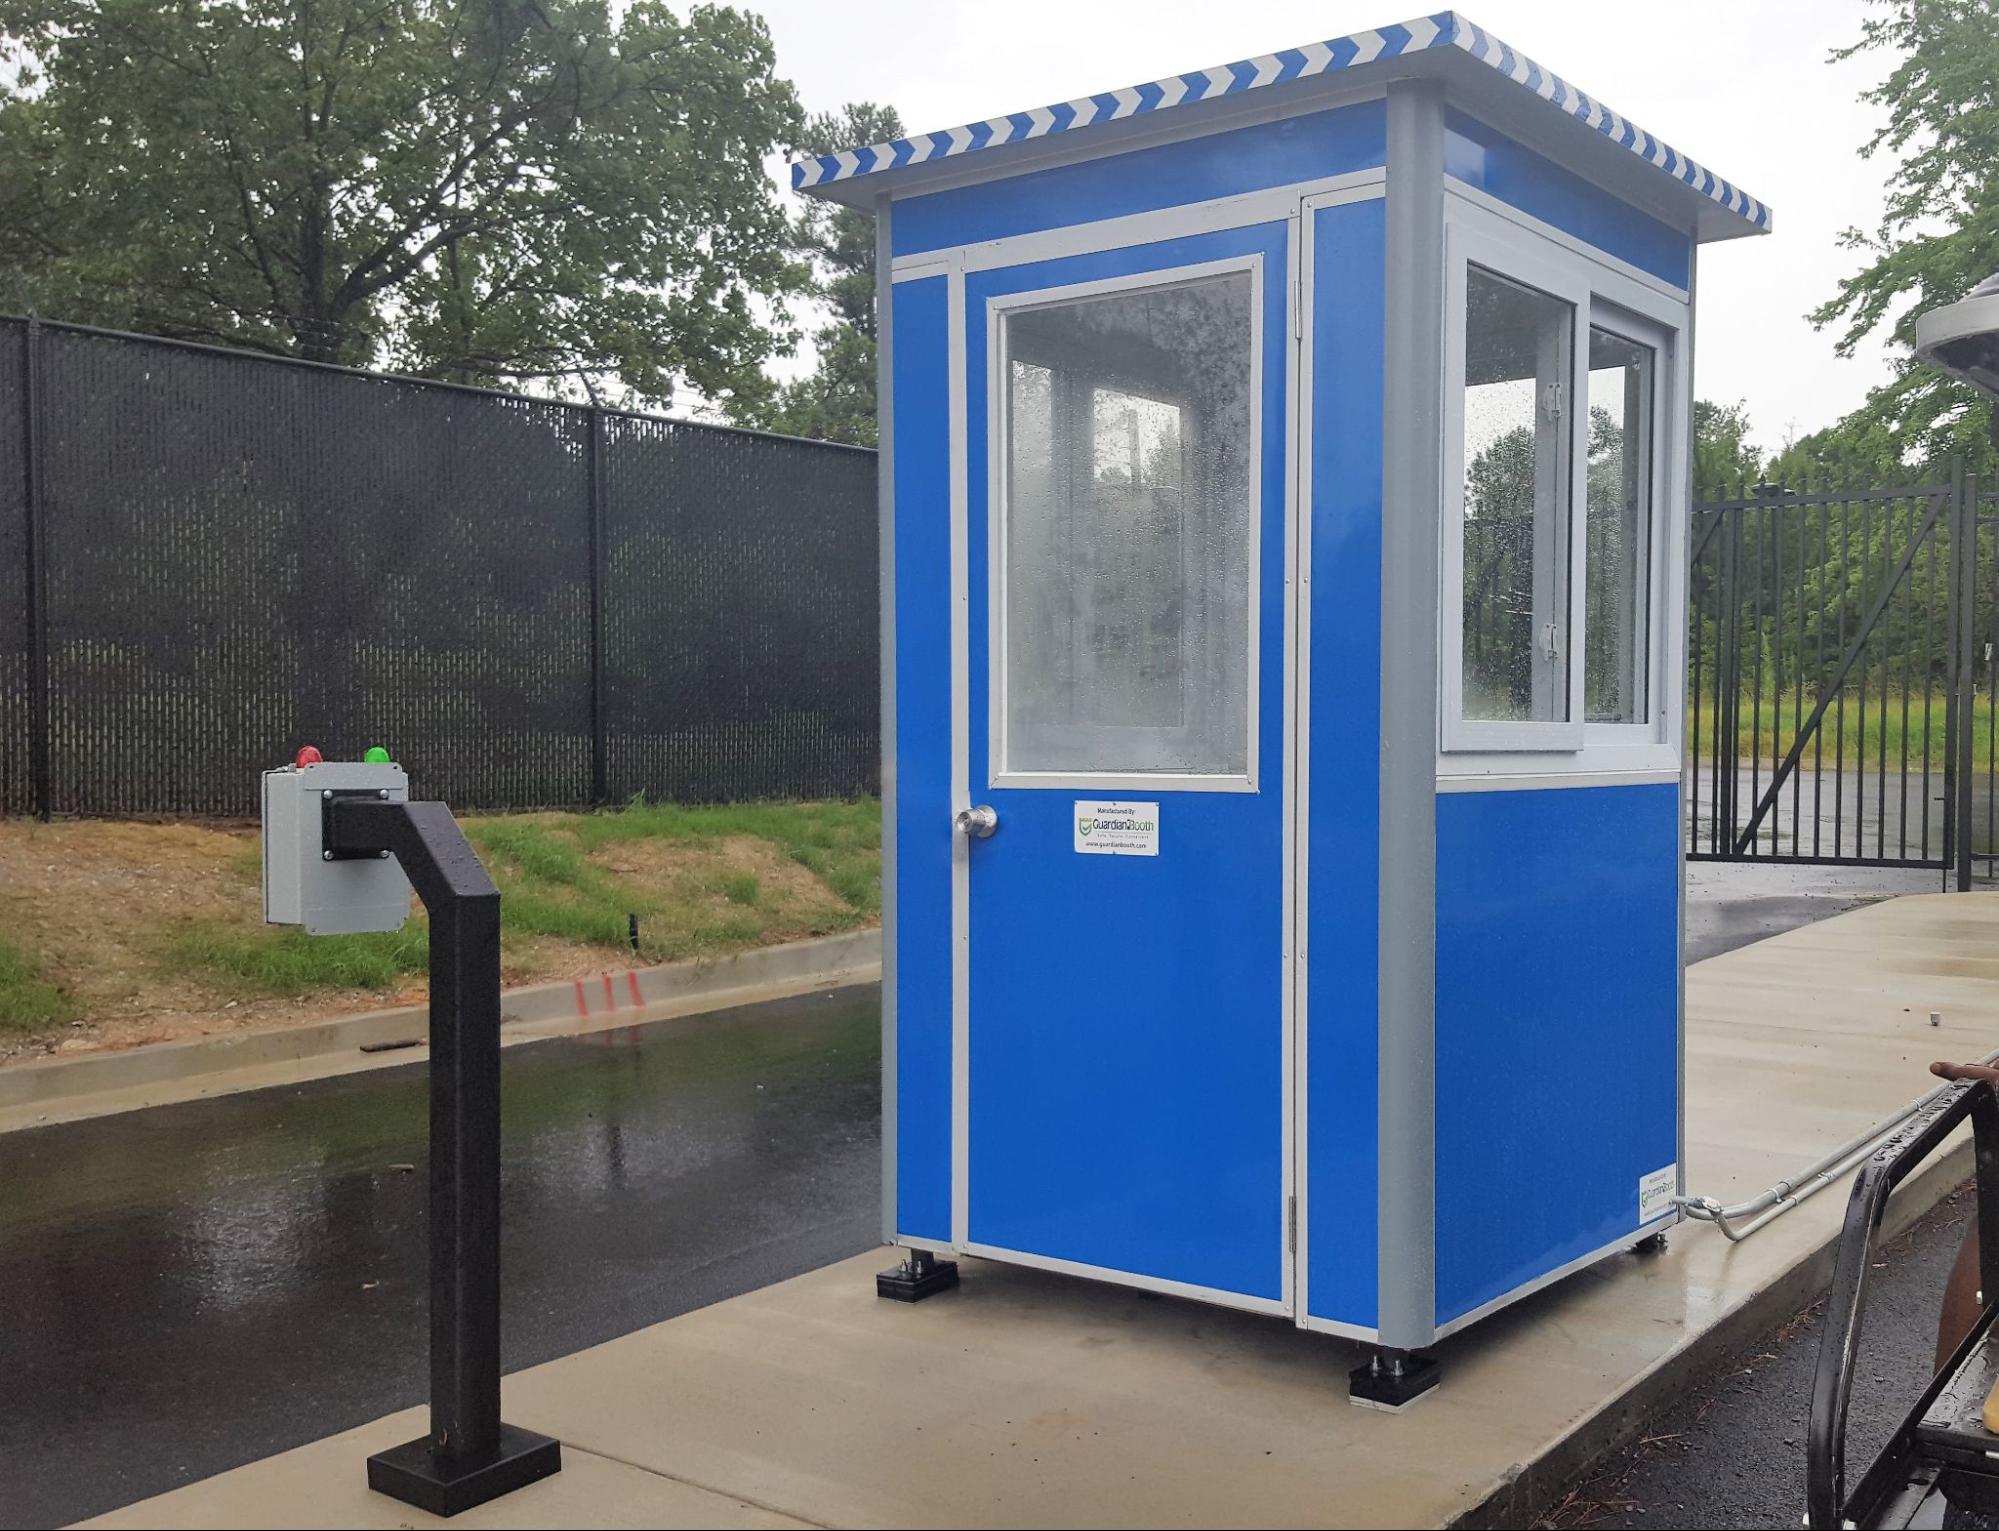 Improving school security with a booth